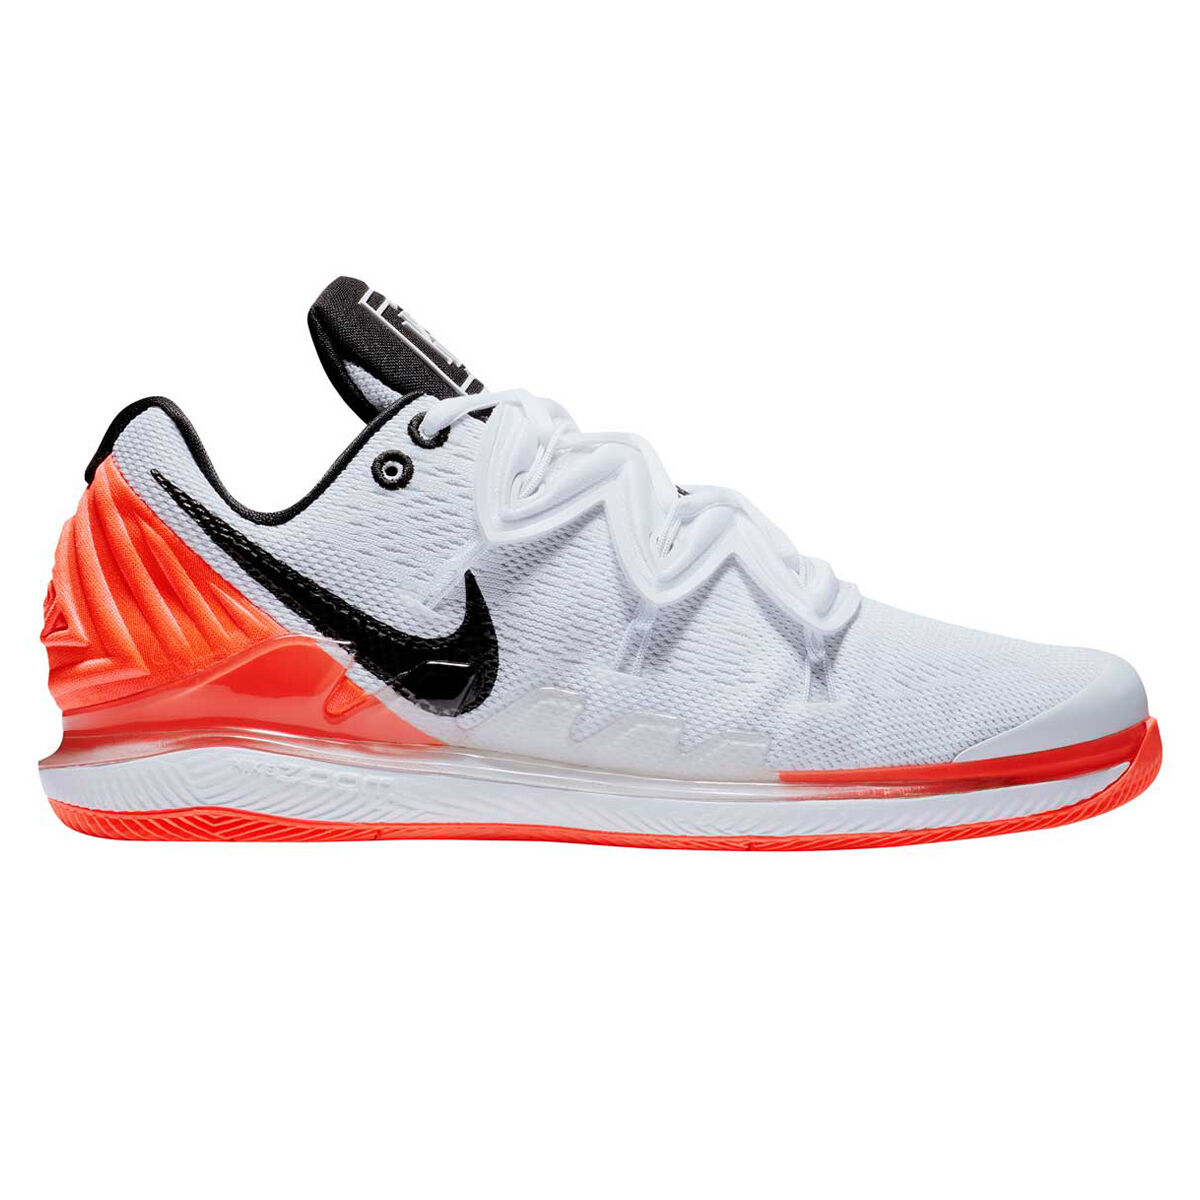 kyrie gym shoes